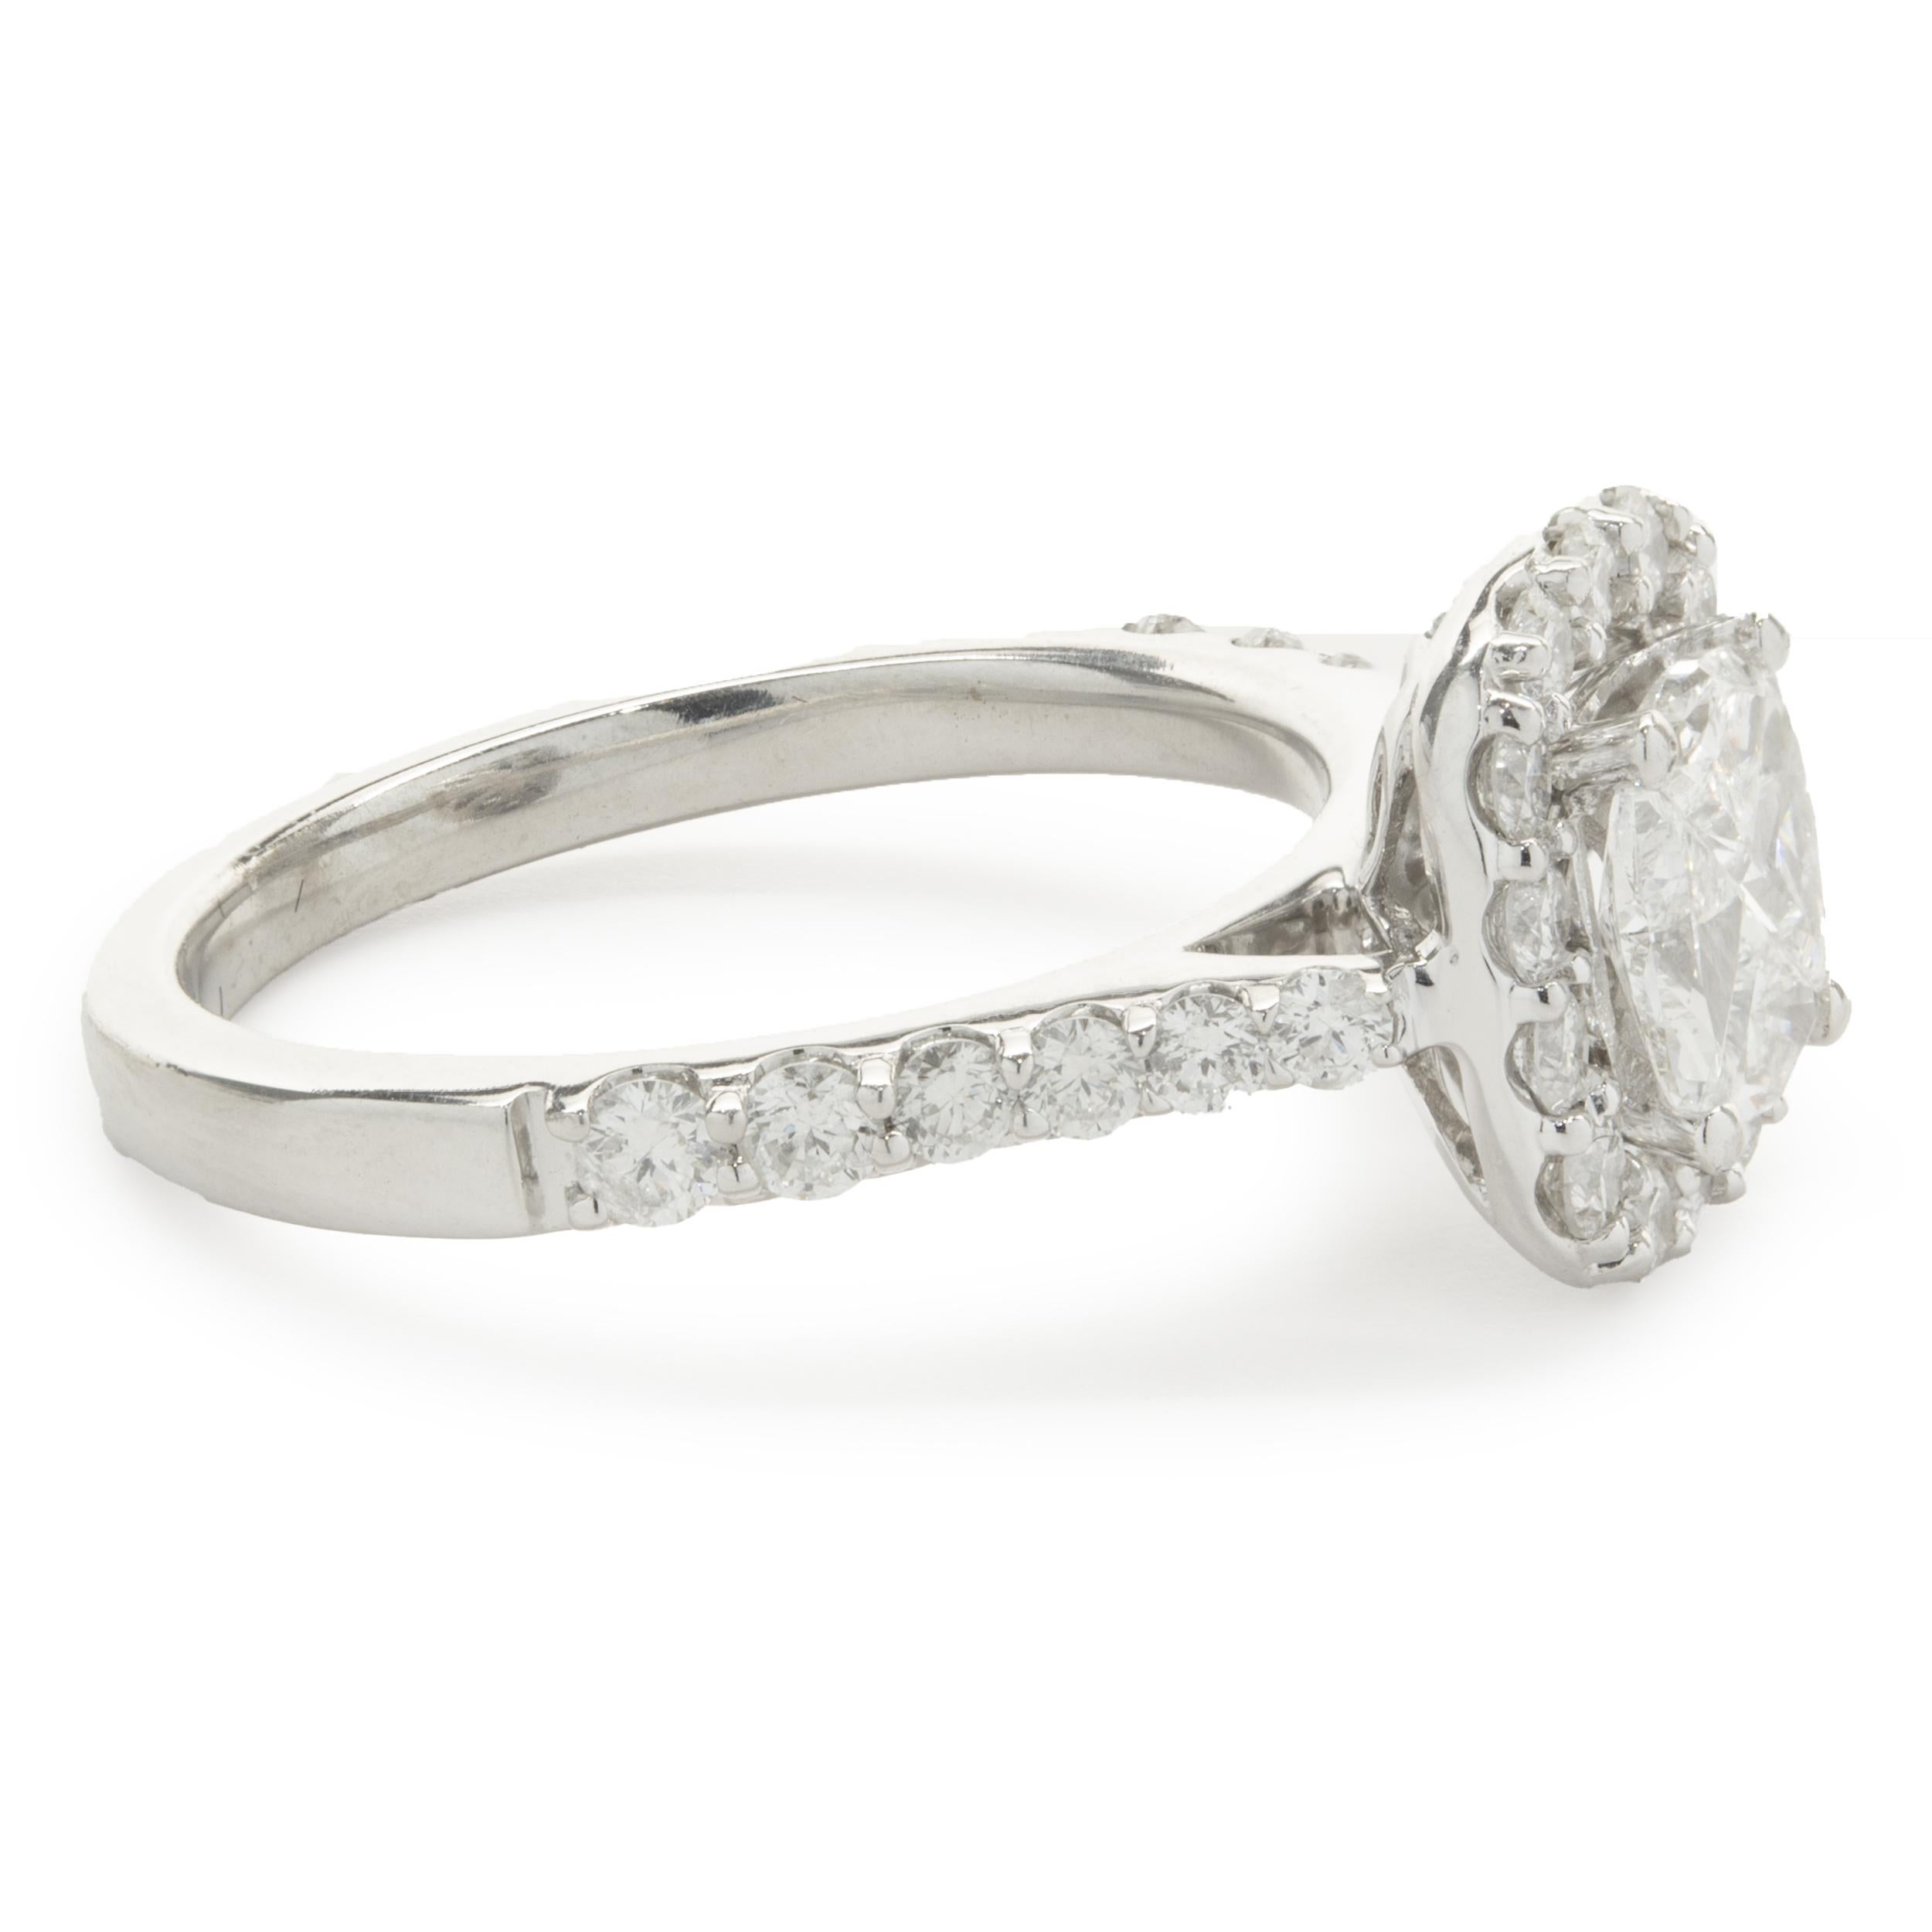 Designer: custom
Material: 14K white gold
Diamond: 4 trillion cut = 0.75cttw
Color: I
Clarity: SI1
Diamond: 26 round brilliant cut = 0.90cttw
Color: G
Clarity: SI1
Ring Size: 7.25 (please allow up to 2 additional business days for sizing